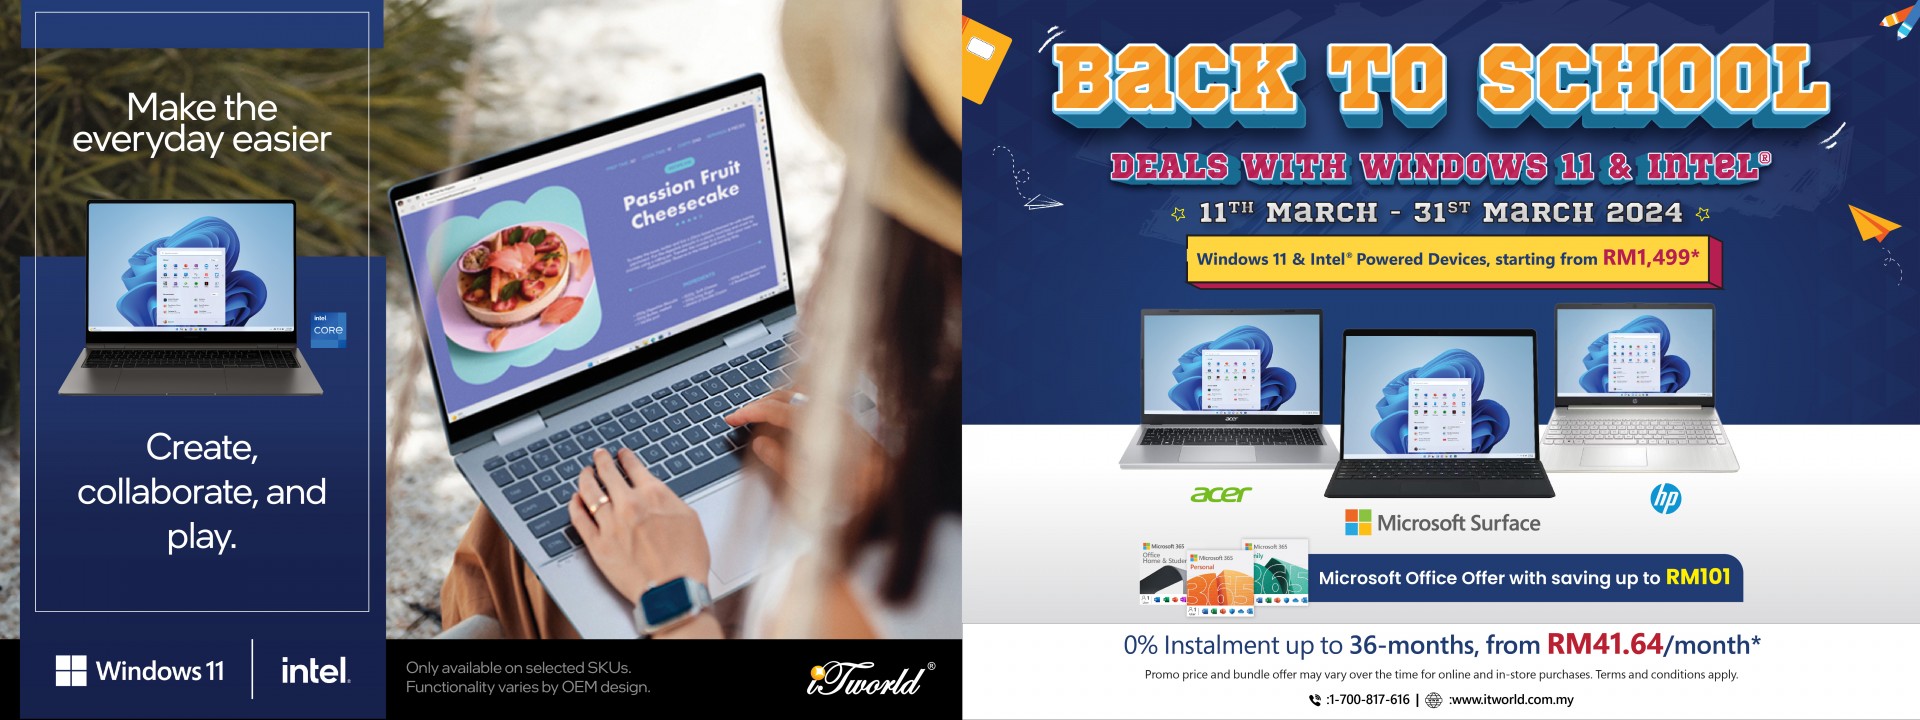 Back to School Deals with Windows 11 & Intel 